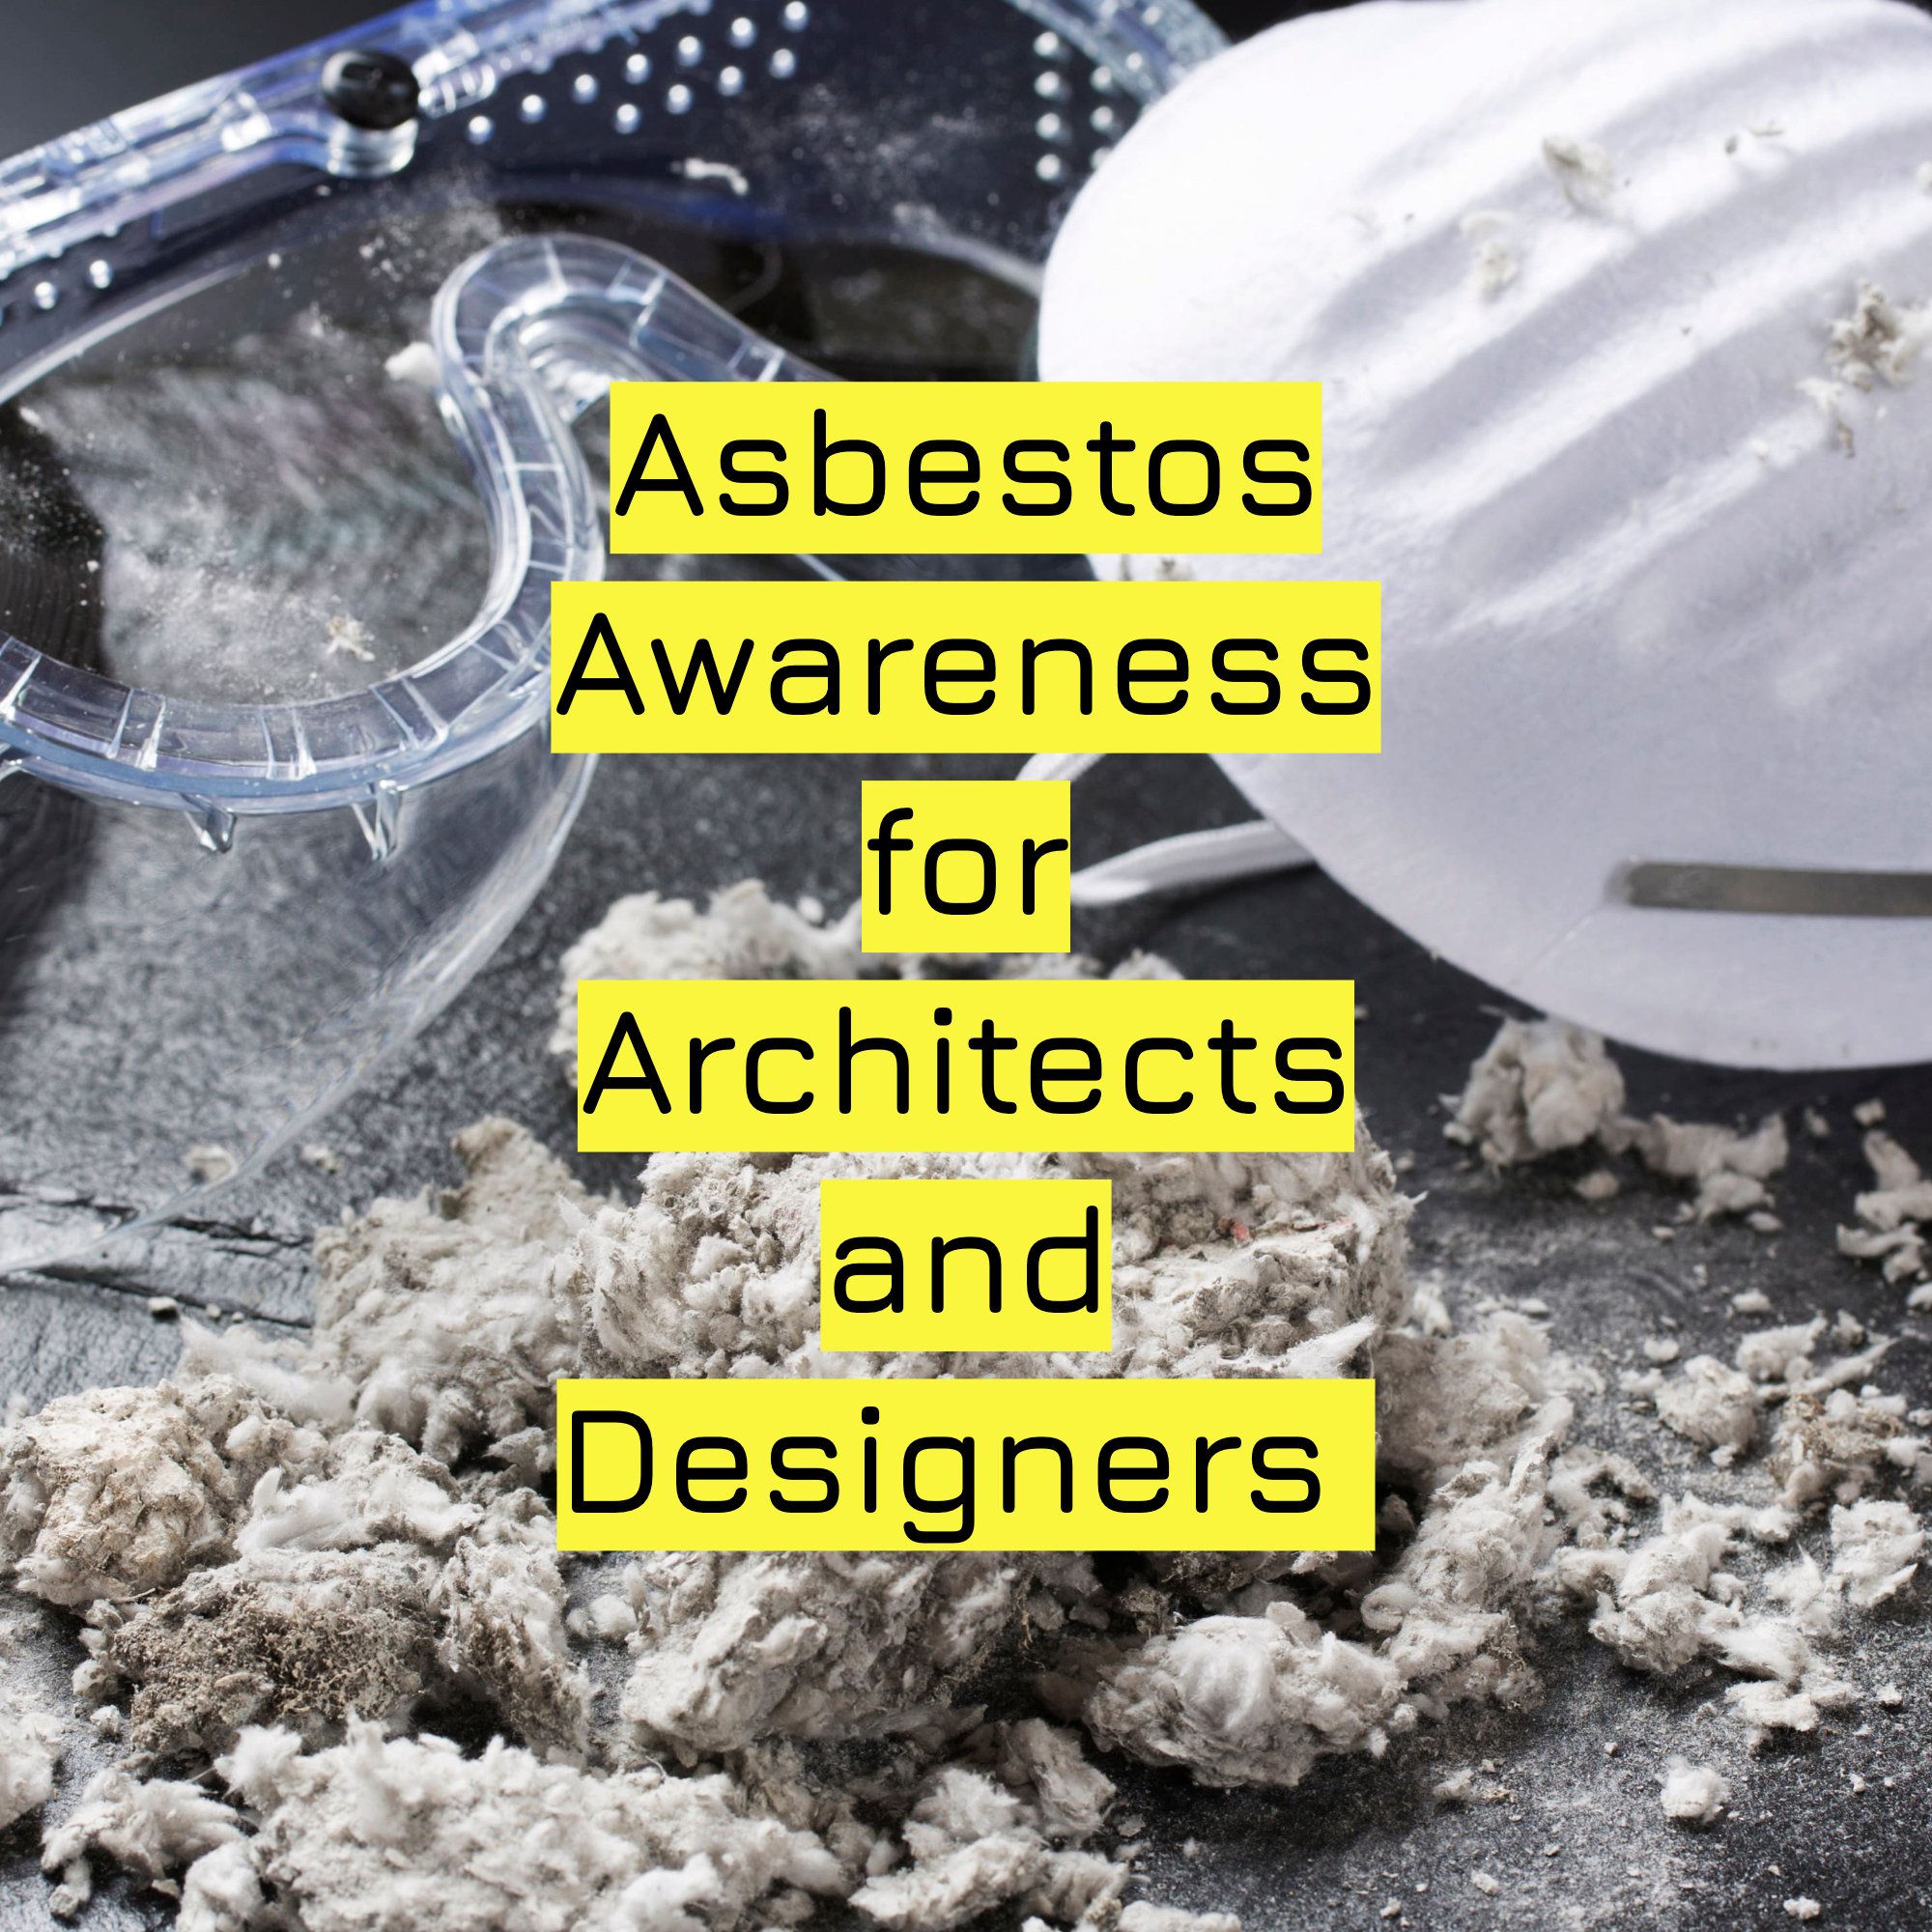 _Asbestos Awareness for Architects and Designers .jpg